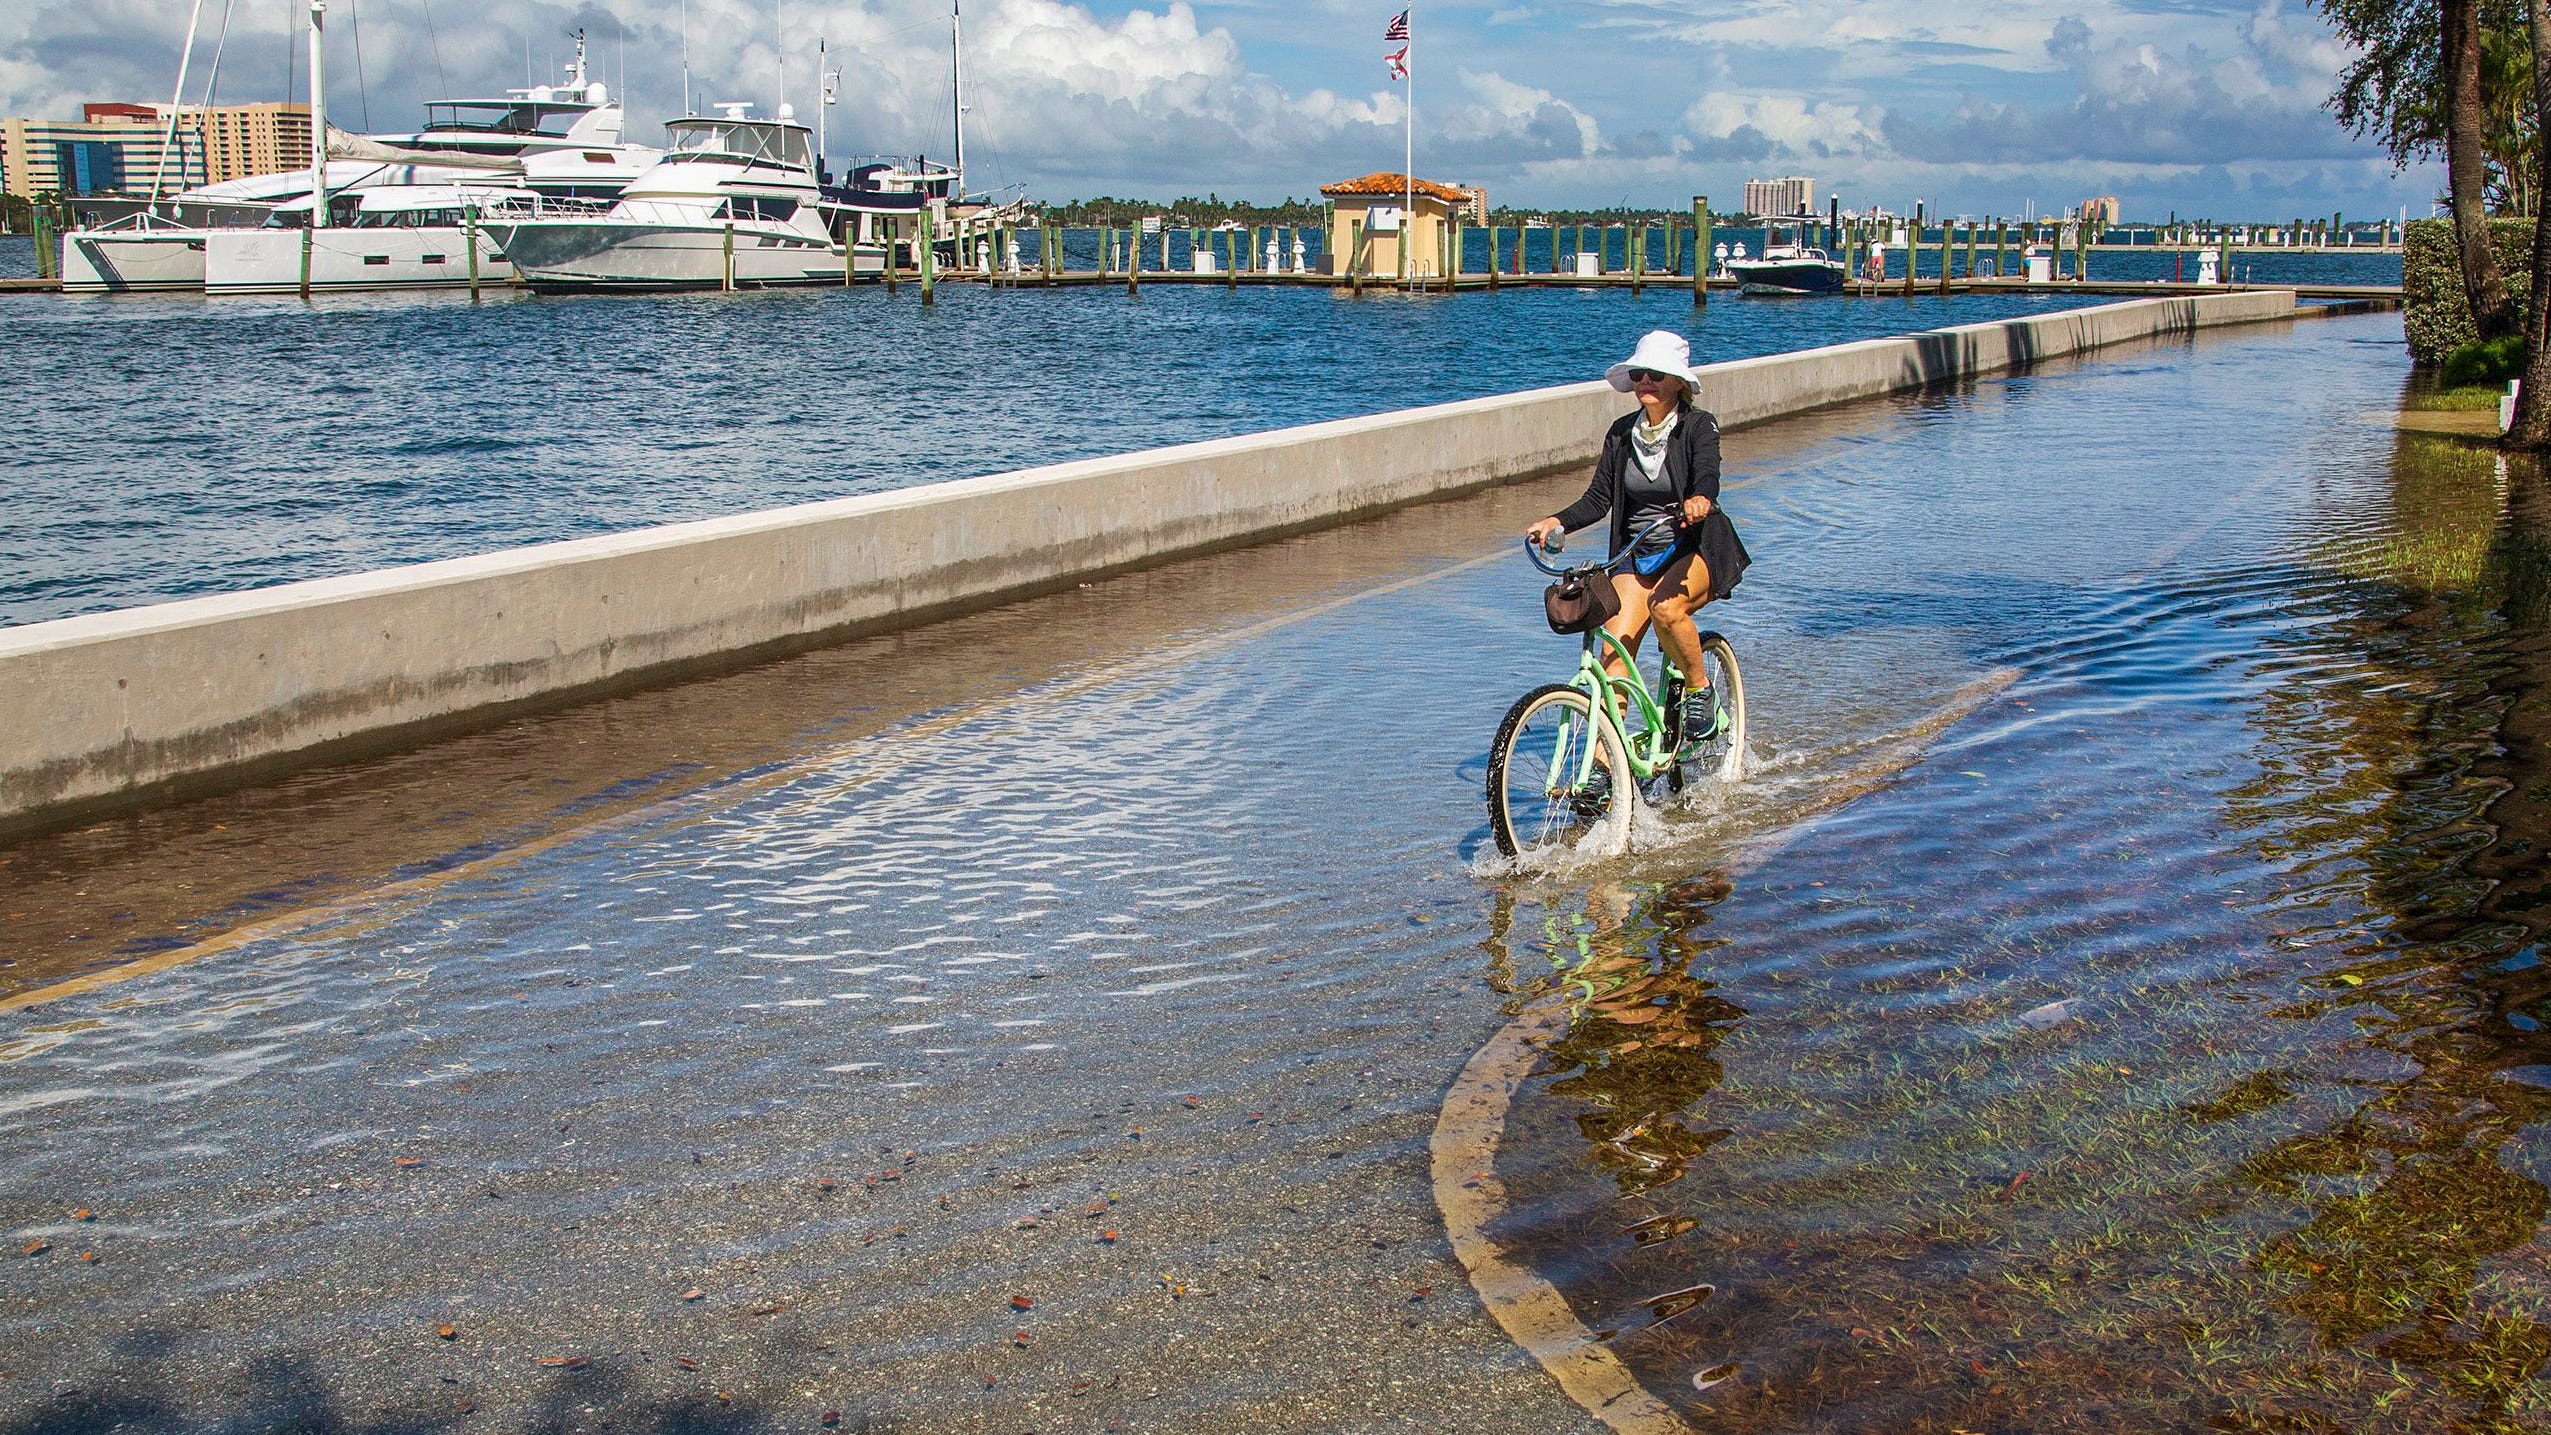 Palm Beach wants more than half a million dollars from state for climate change mitigation - Palm Beach Post